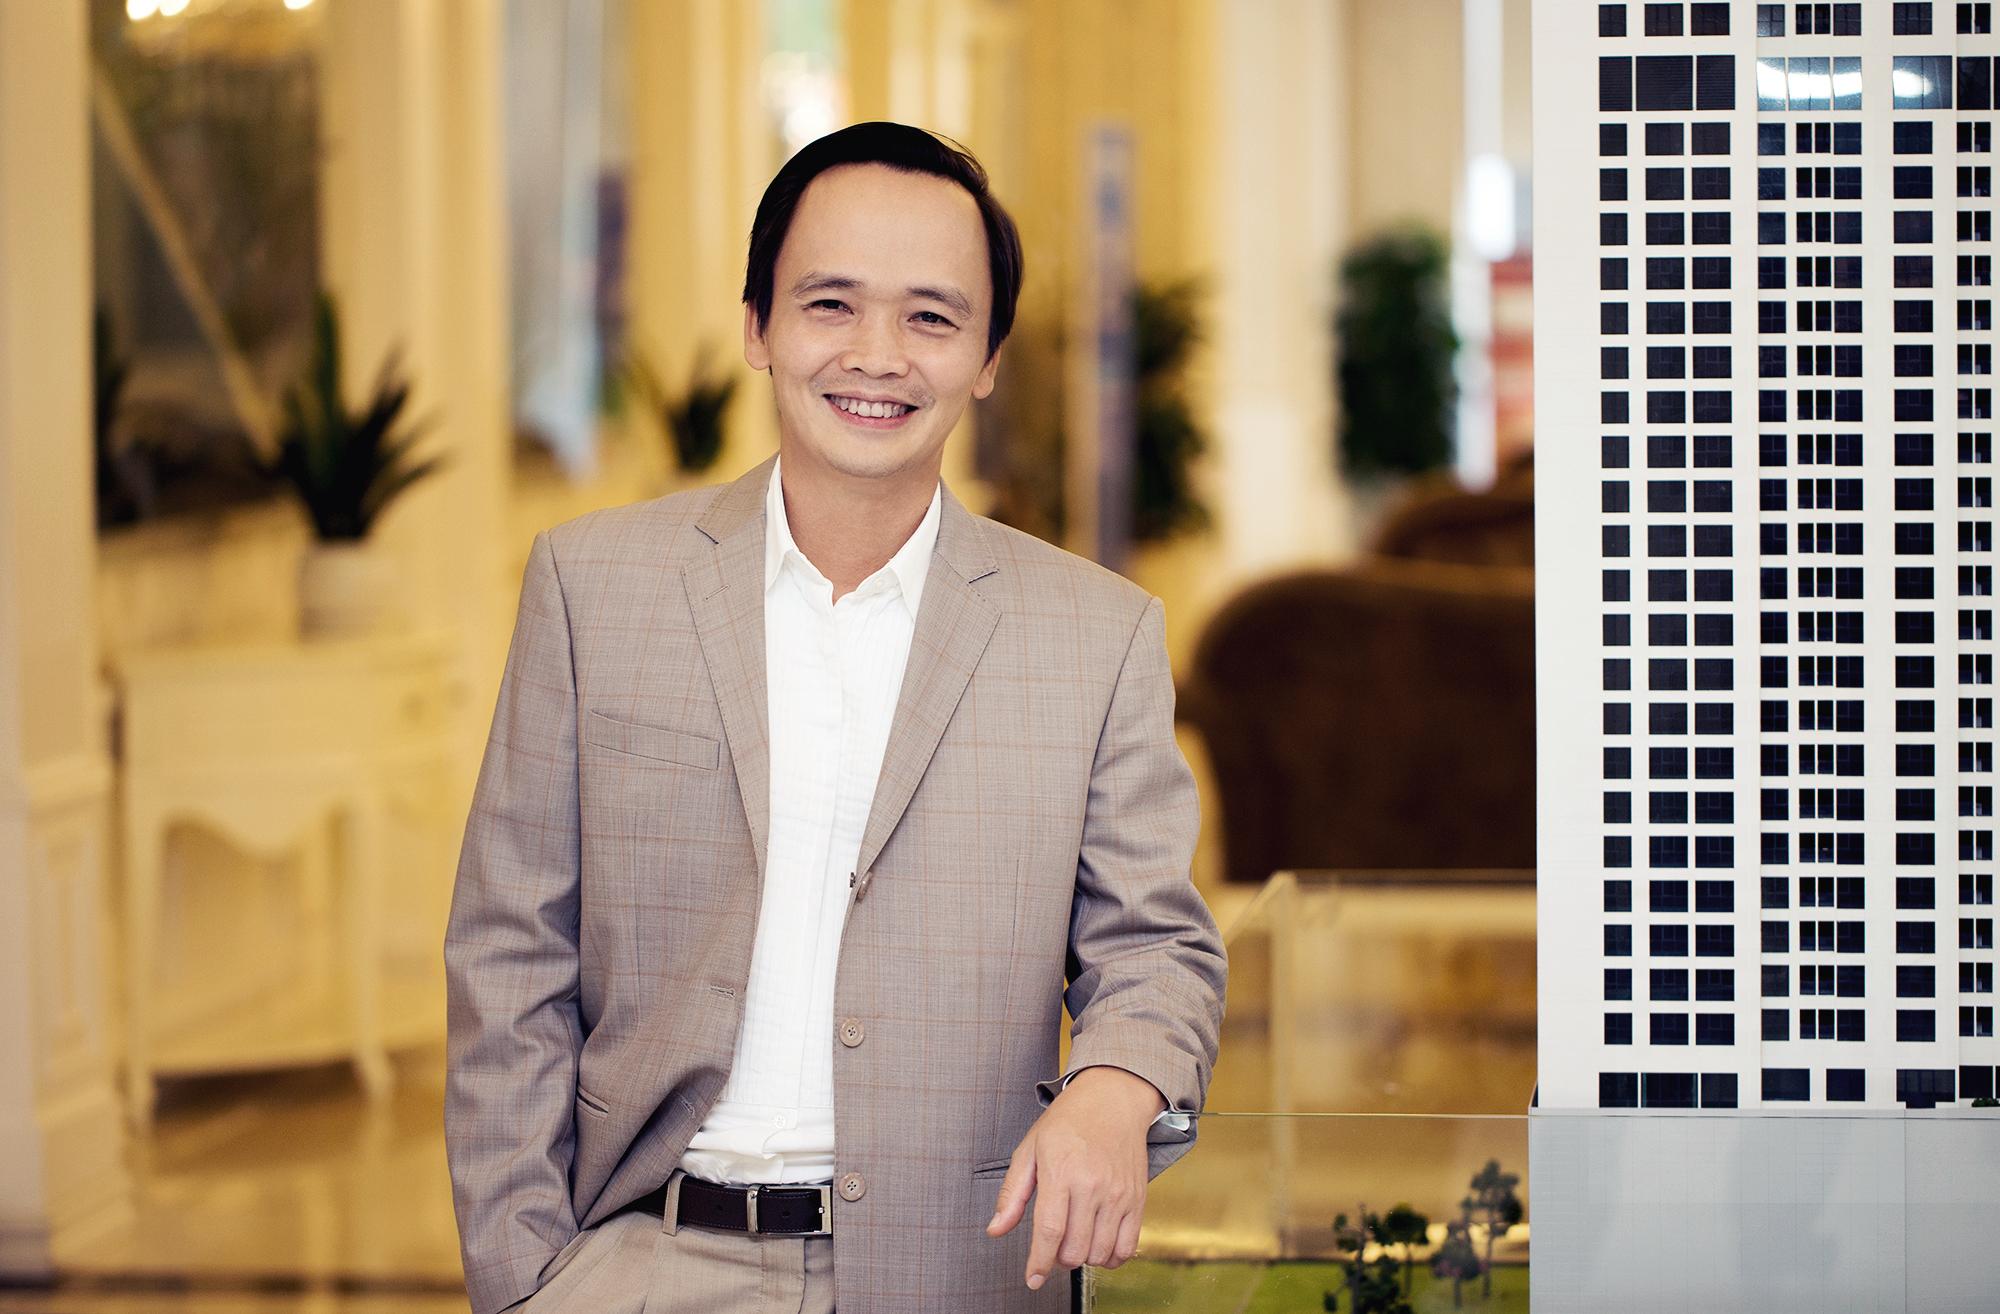  Trinh Van Quyet - the owner of a large amount of real estate in Vietnam